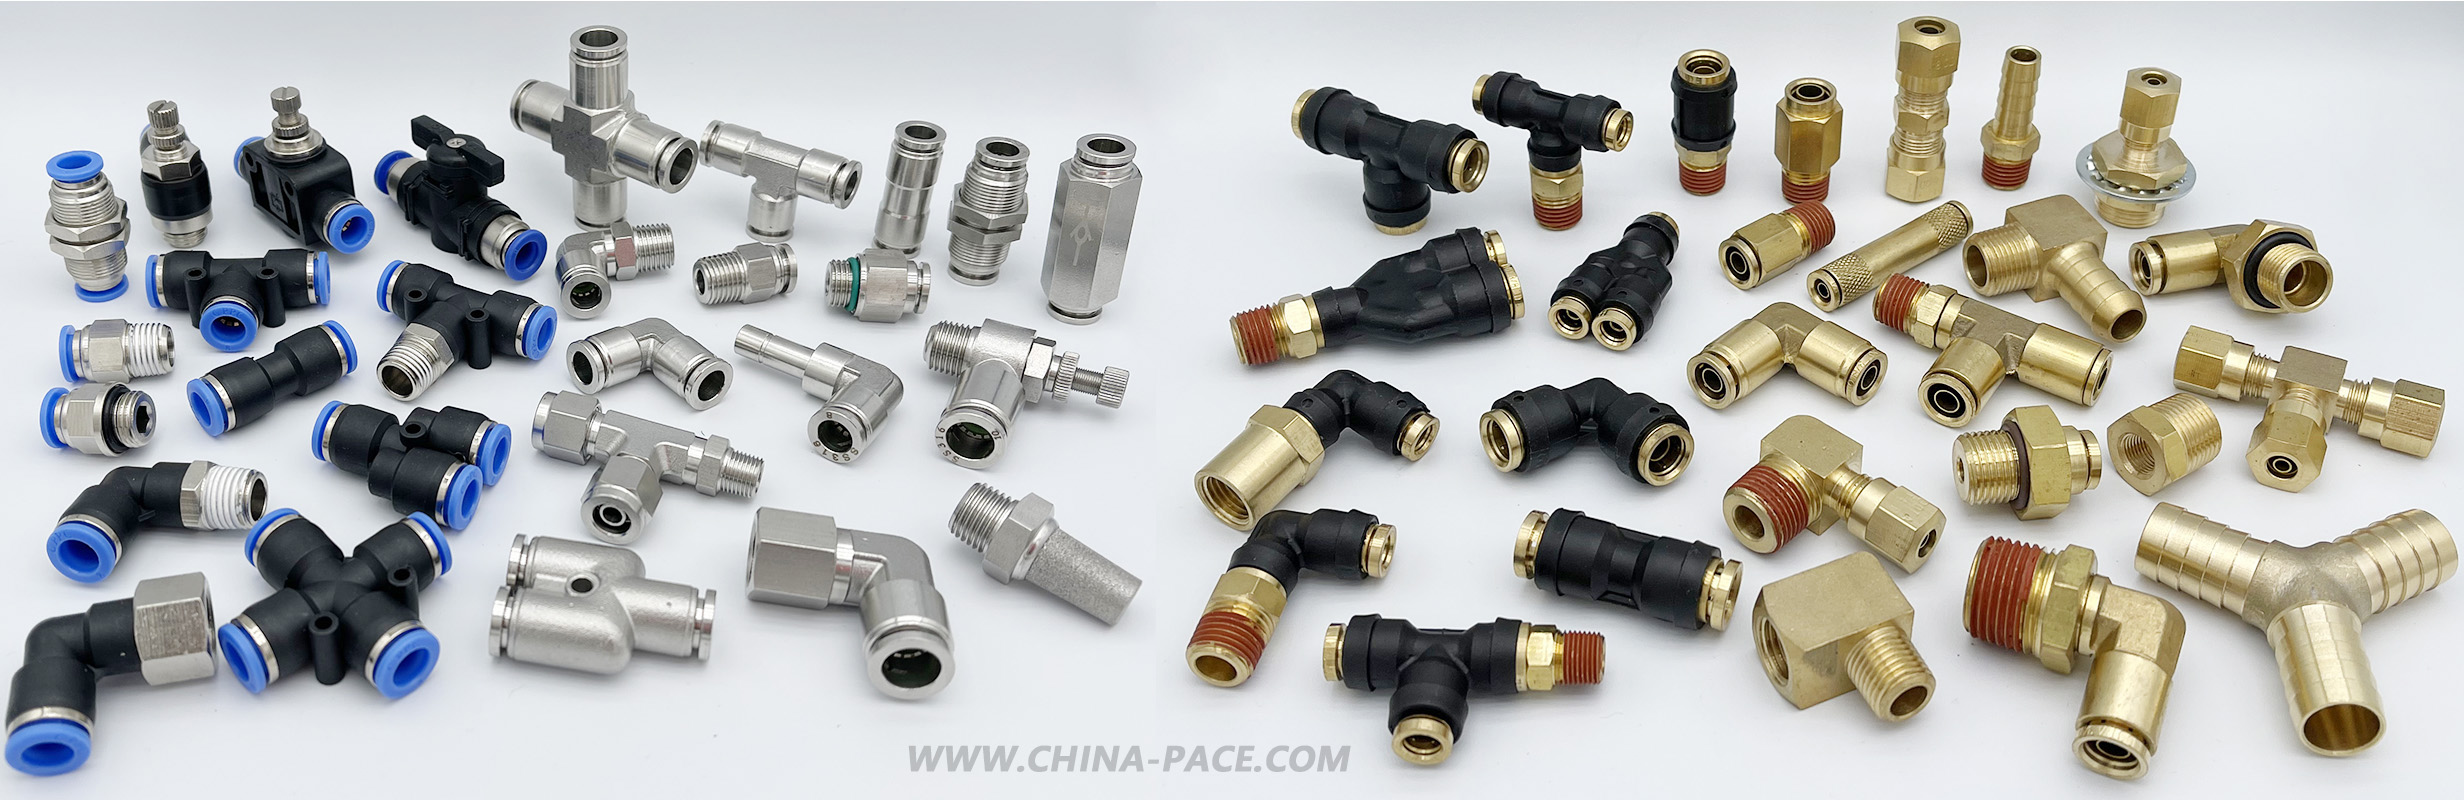 Metal Straight Quick Connector PC8-1 10PC Pneumatic Quick Fittings Durable for 8Mm Air Pipe 